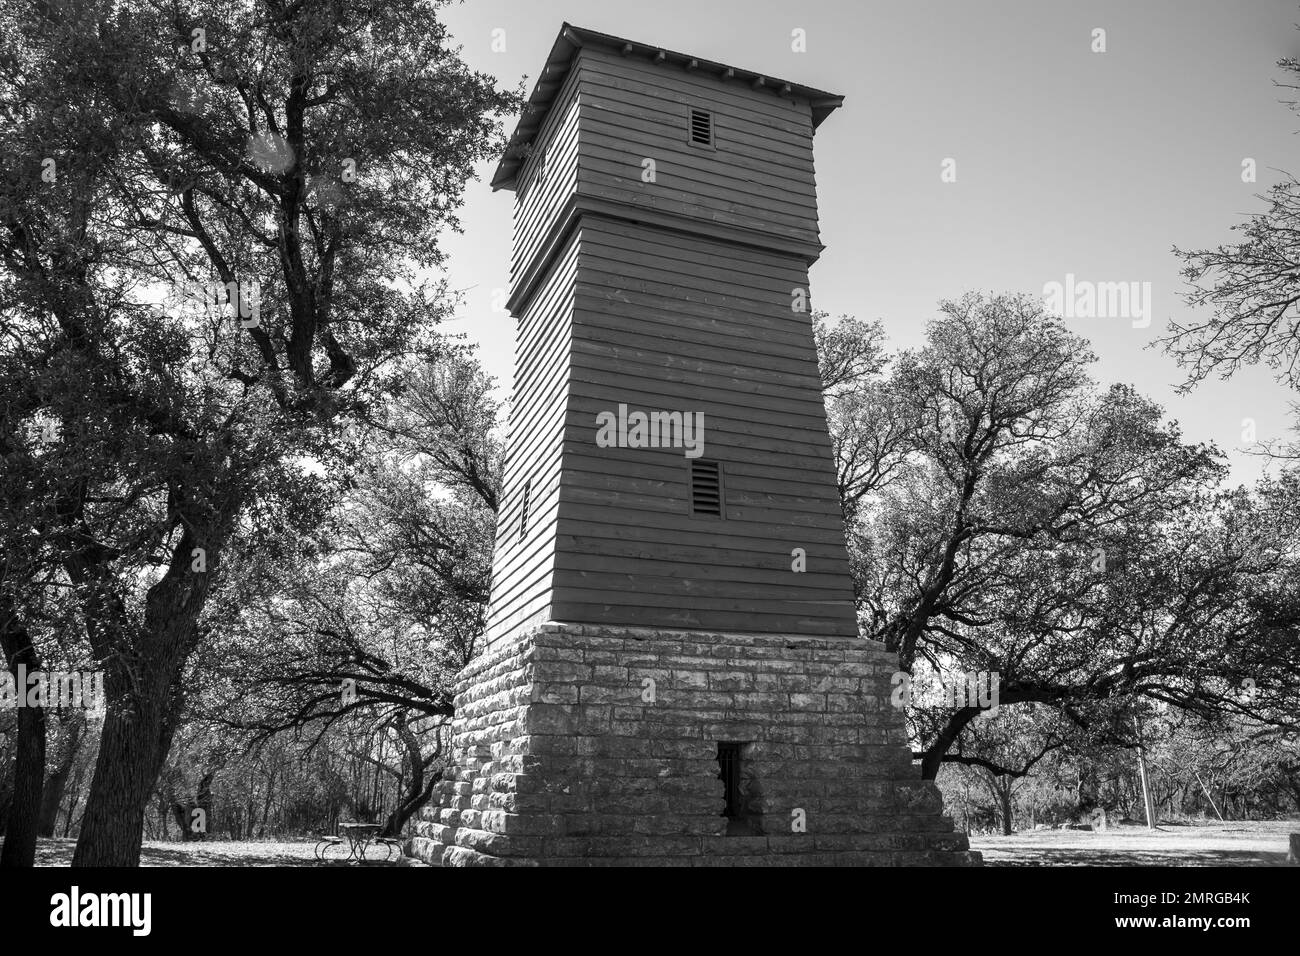 Black & White photo of a tall wooden lookout tower in a State Park Stock Photo